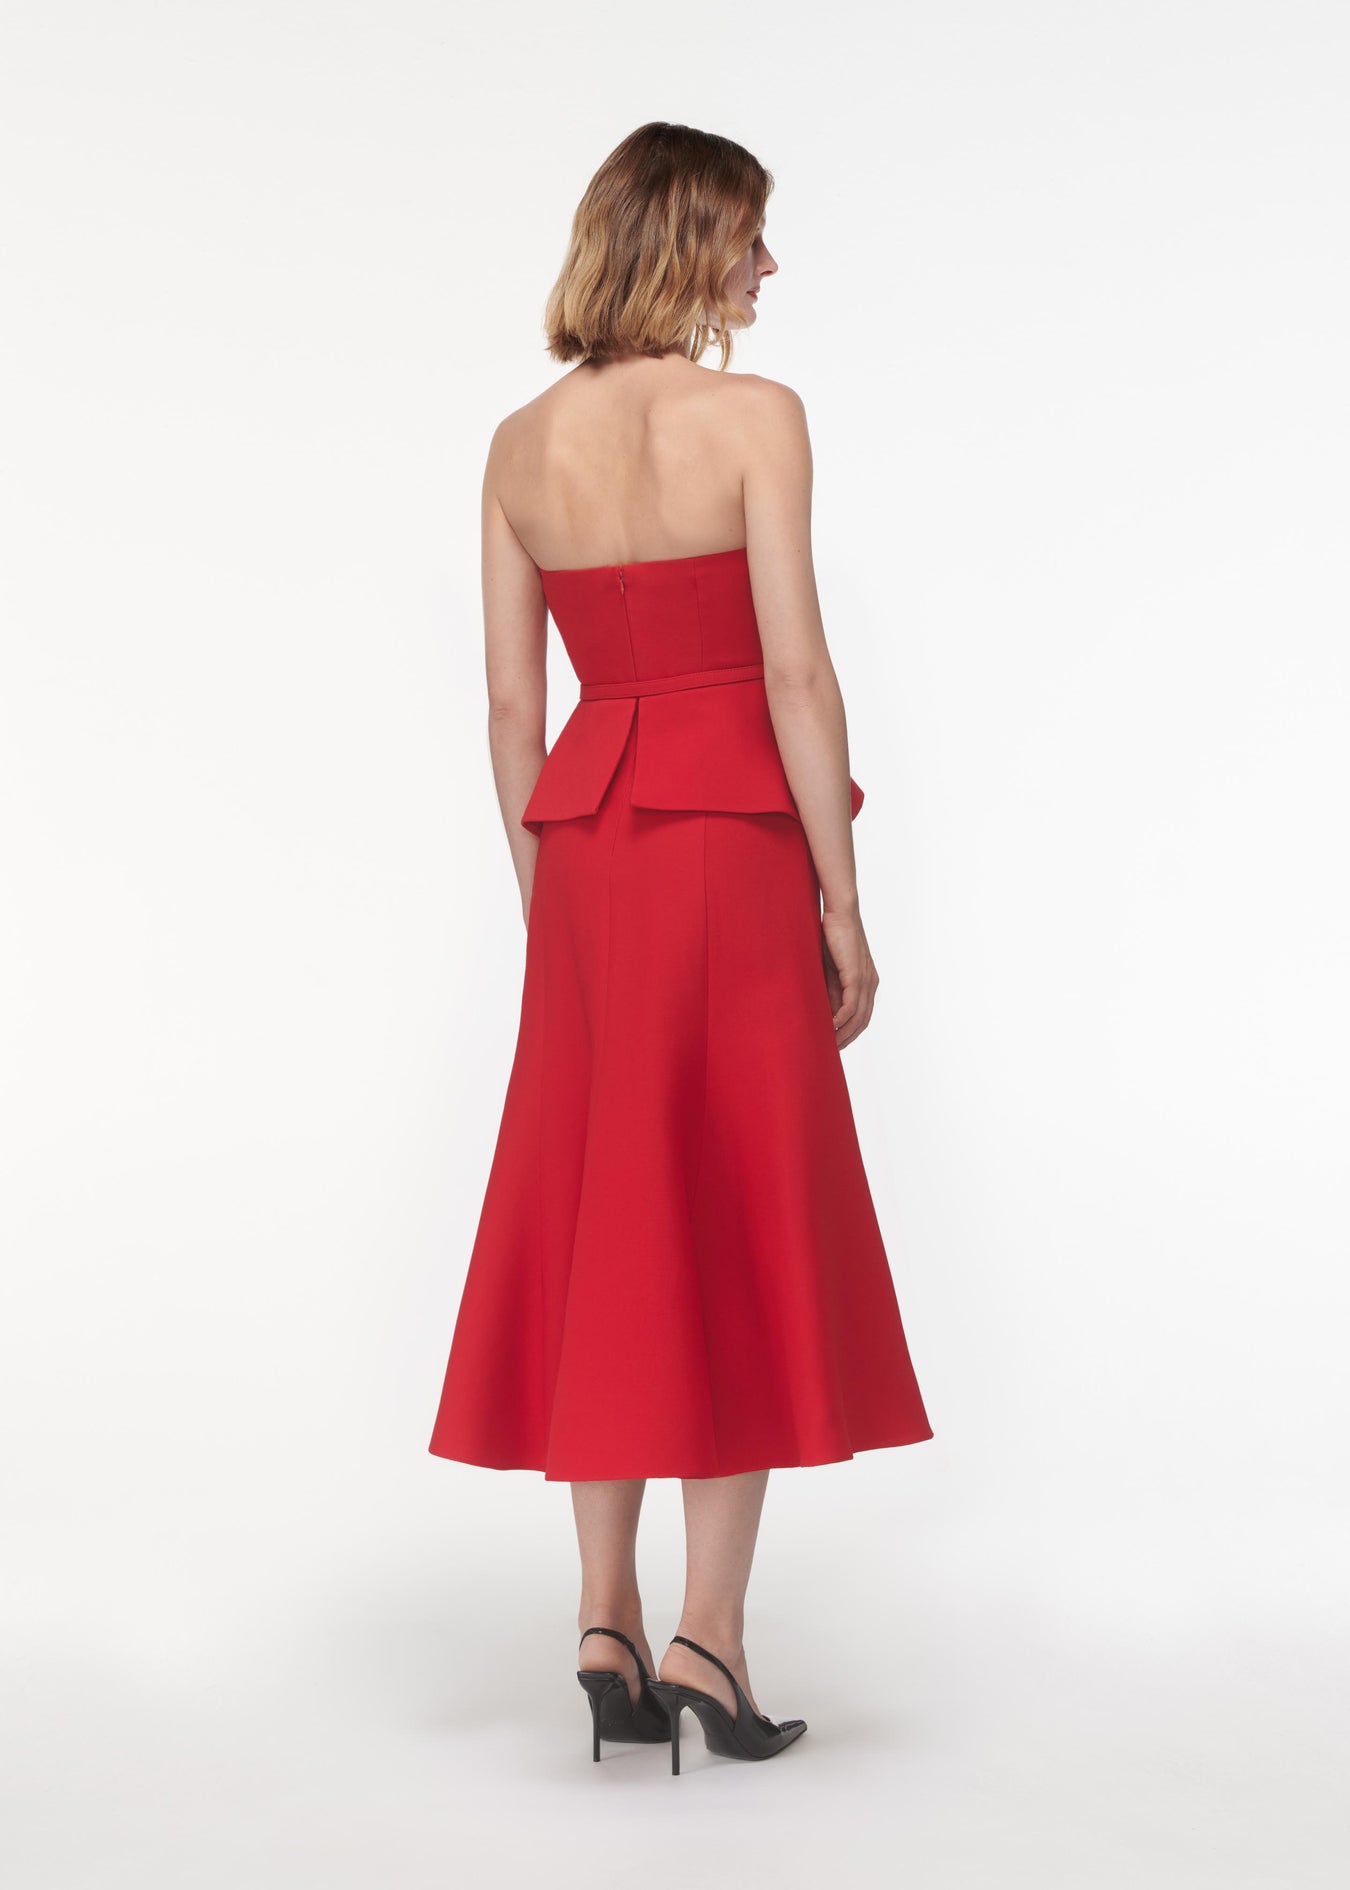 A photograph of a woman wearing a Strapless Wool Silk Peplum Midi Dress in Red